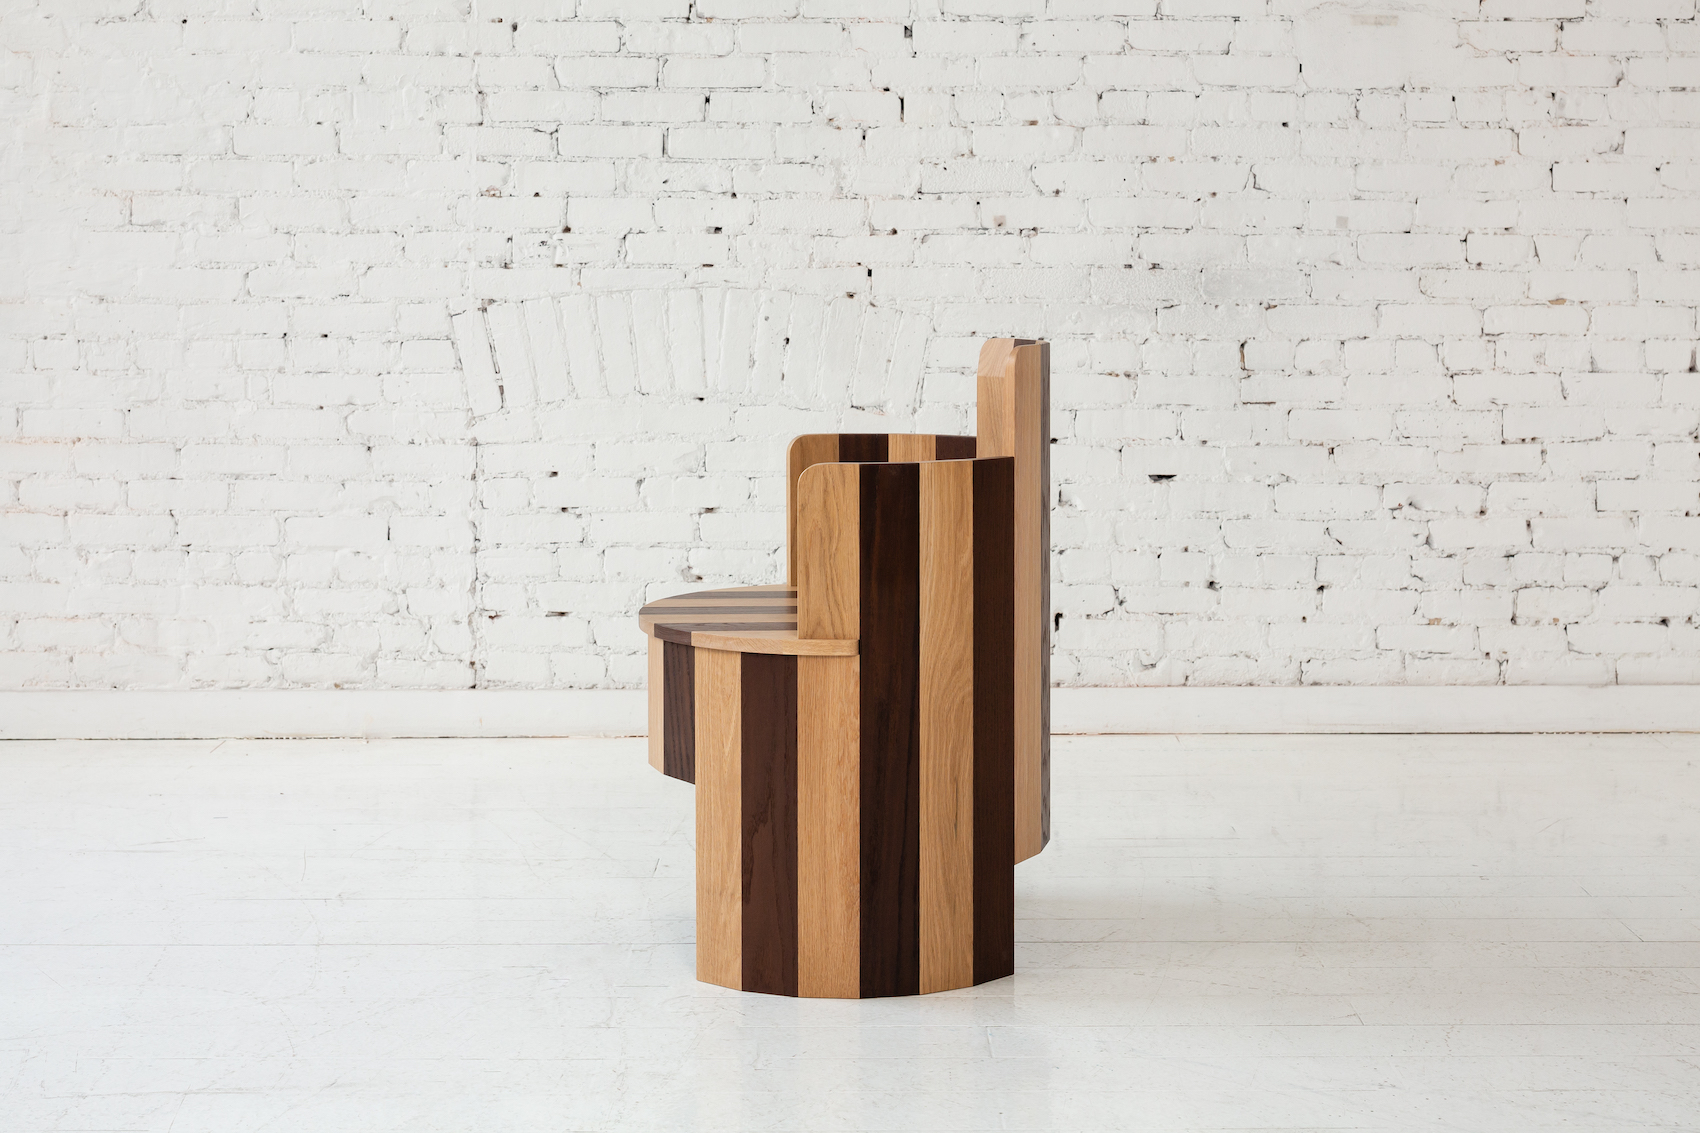 Minimalist Collection of Furniture "Cooperage" by Fort Standard﻿